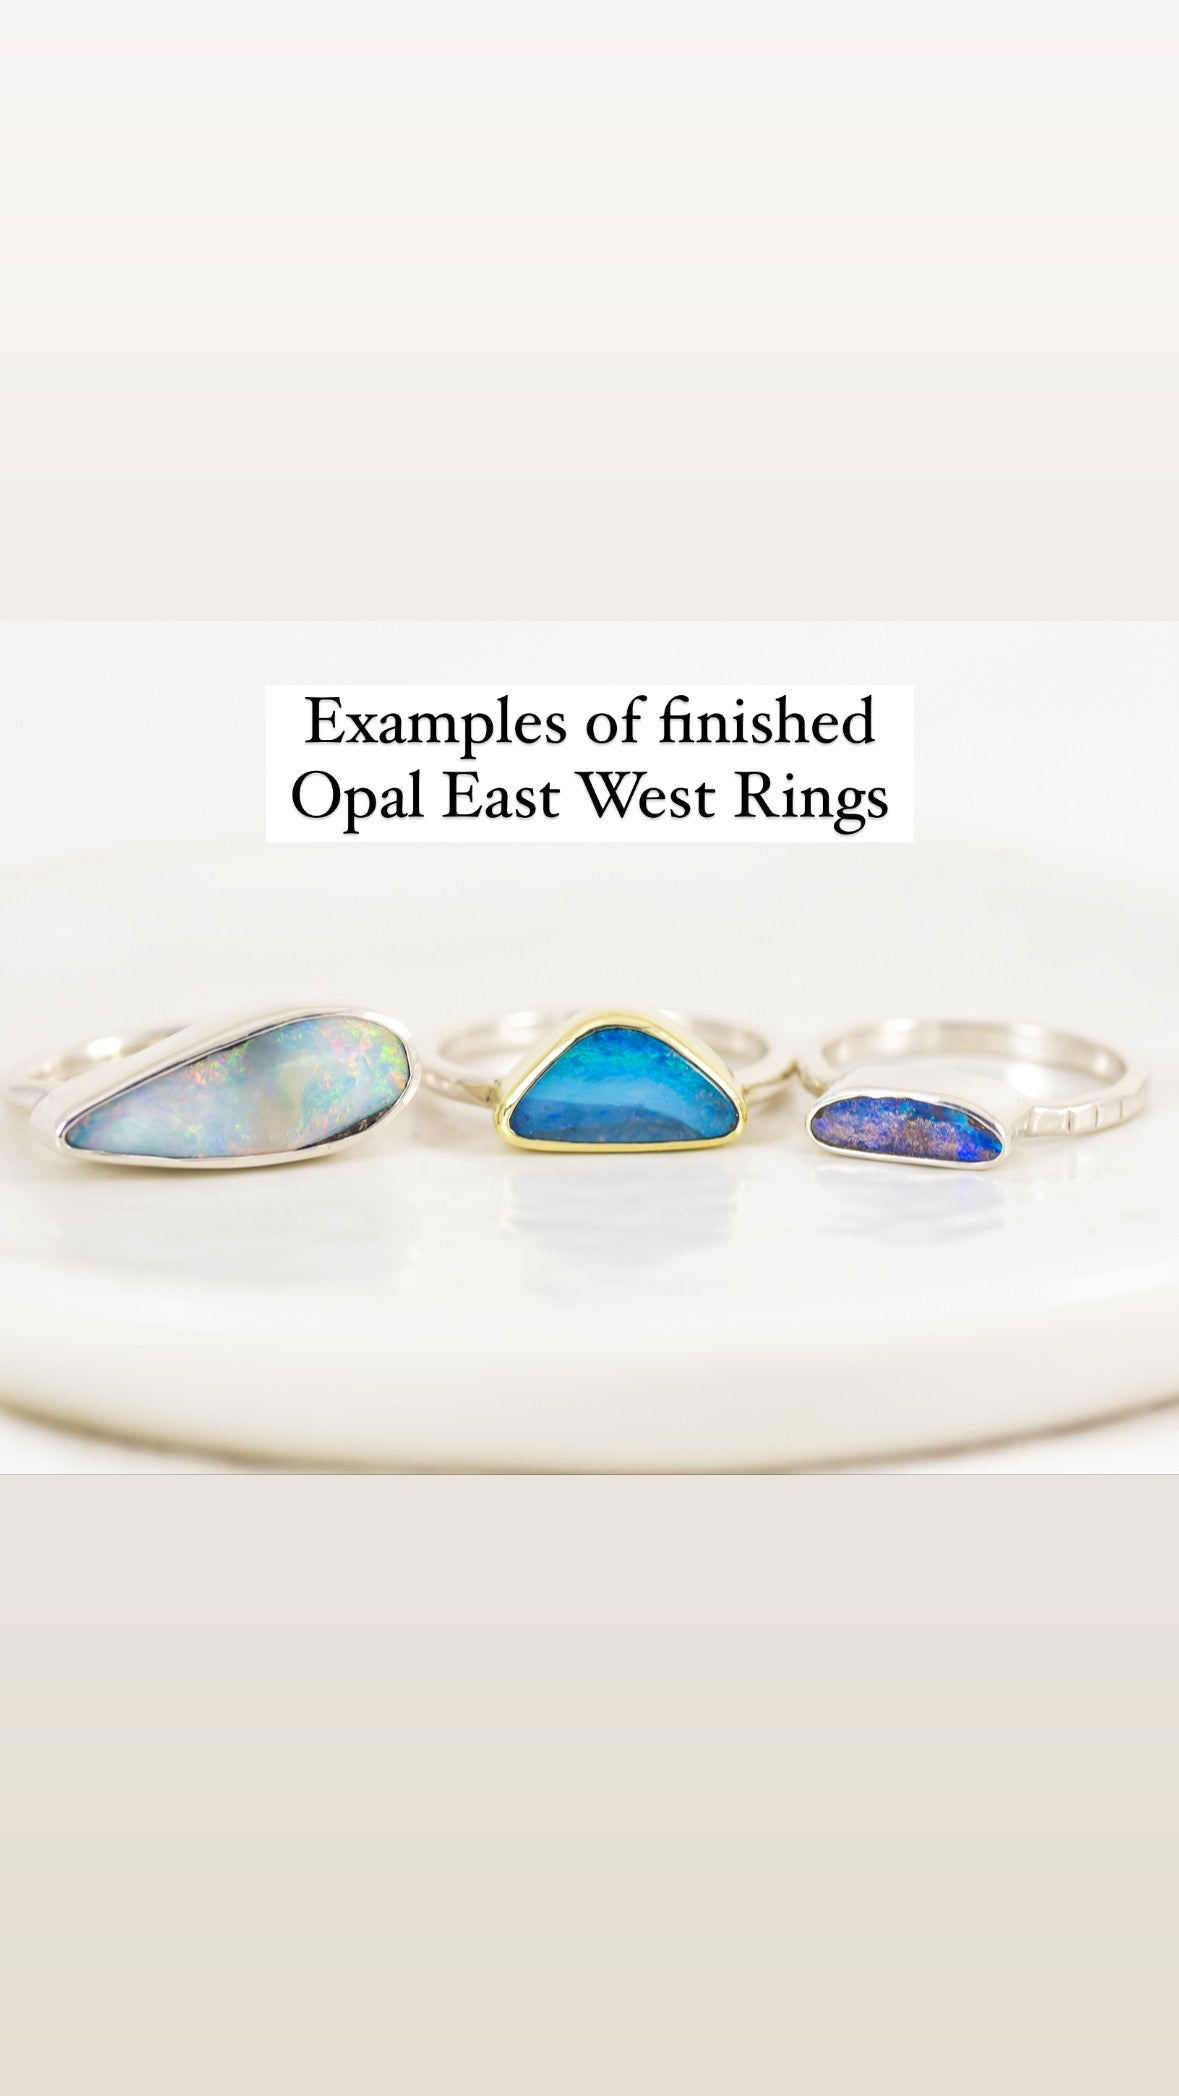 Opal East West Ring #1 (Pre-Order) ◇ Australian Opal ◇ Made in your size